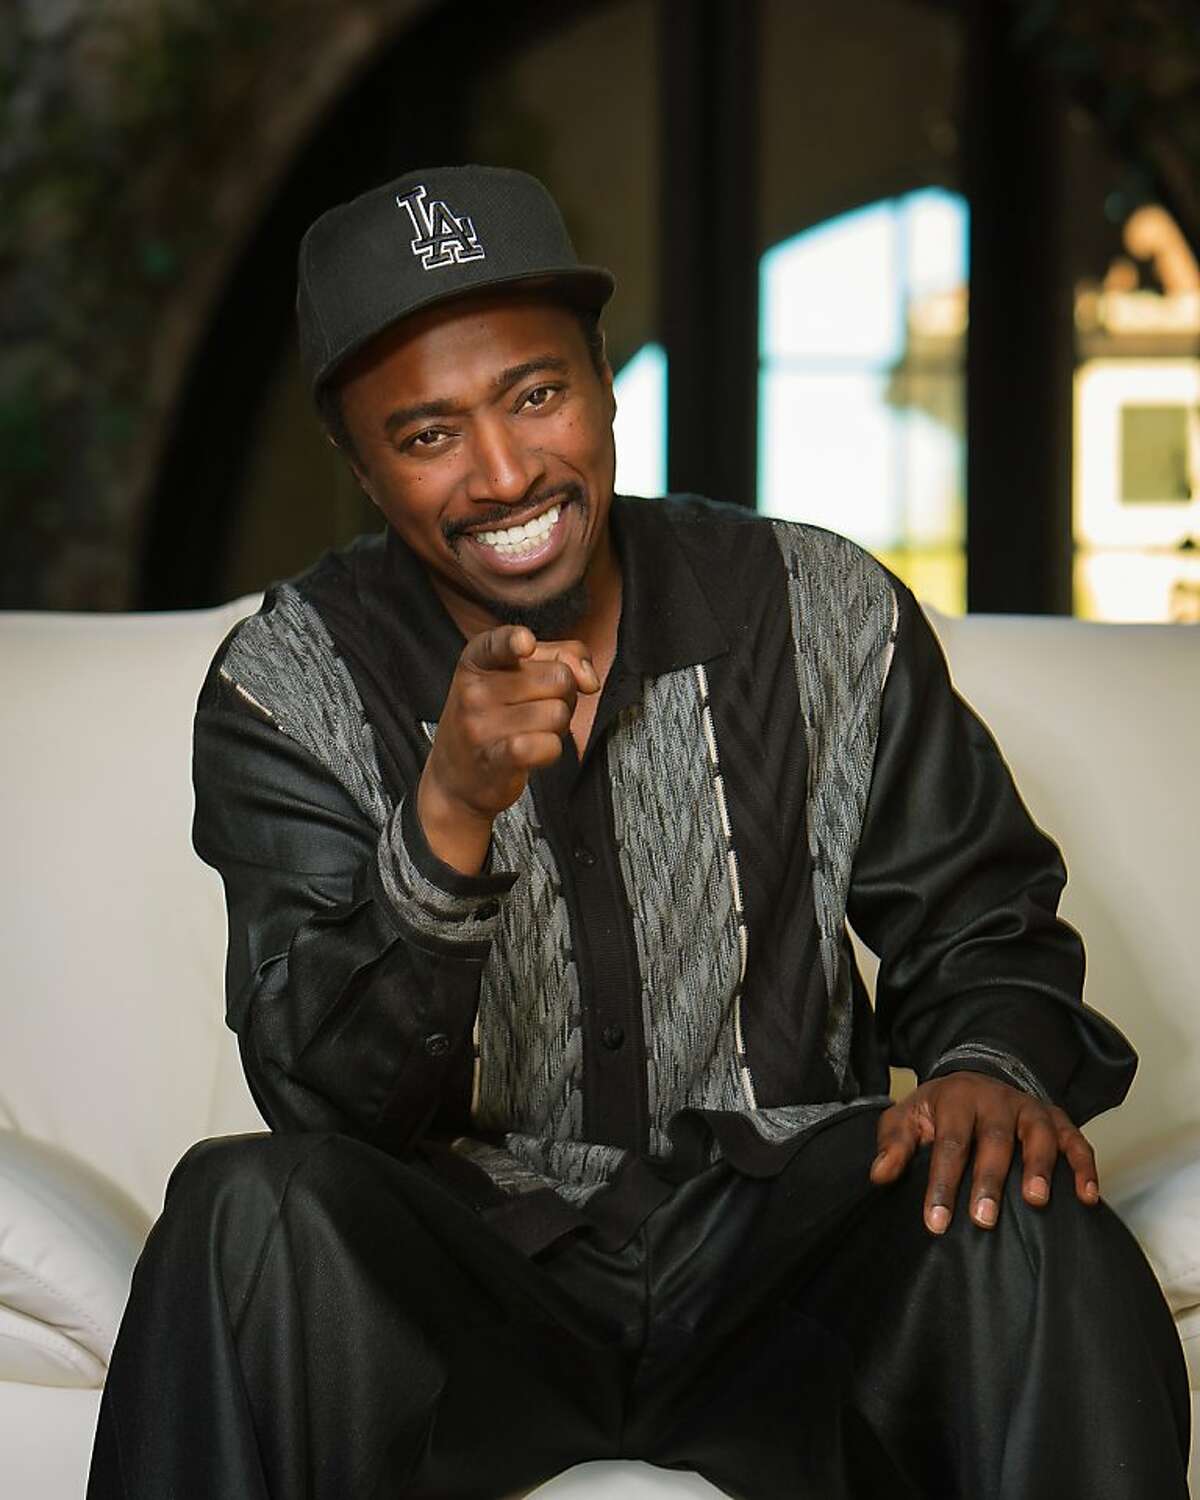 Eddie Griffin Plays it for laughs in San Jose